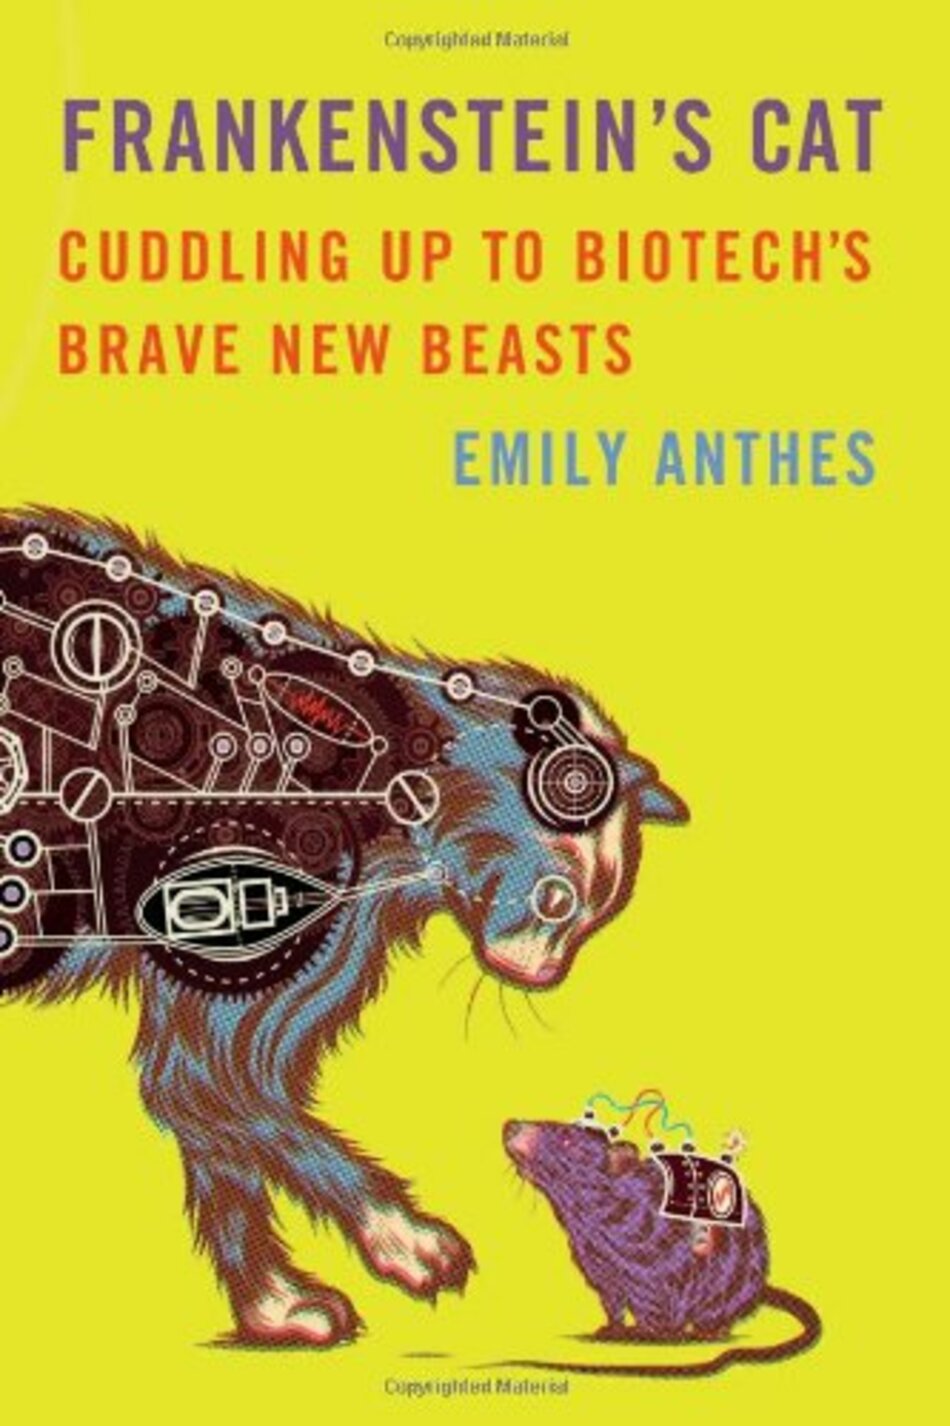 Genetic Engineering, Biotechnology and Brave New Beasts